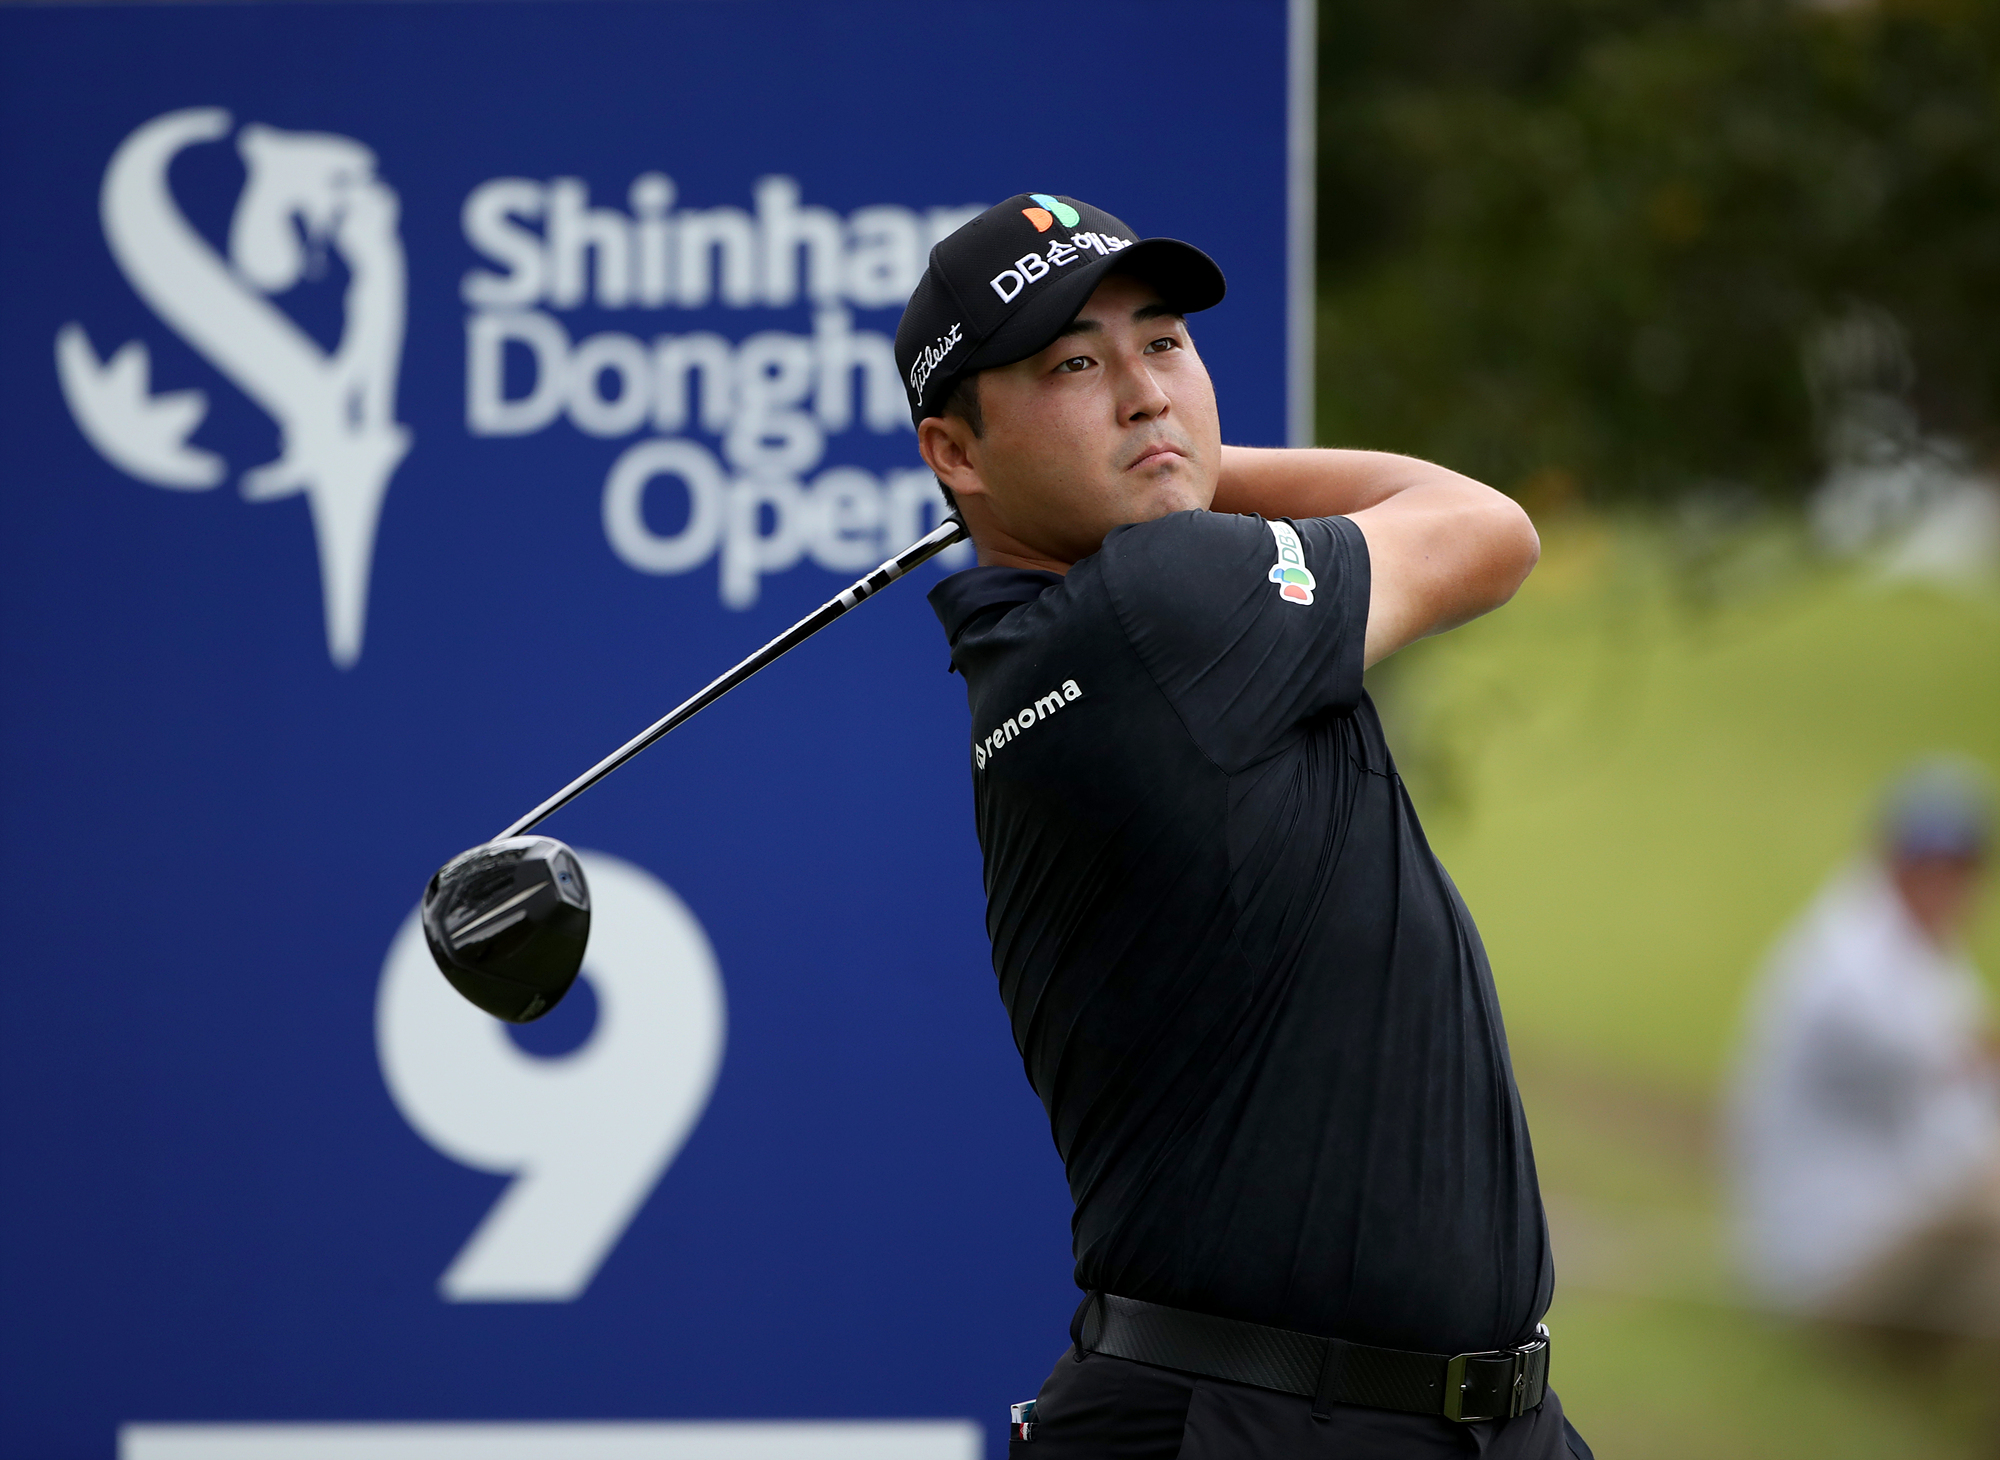 Richard T. Lee Takes Early Lead At 38th Shinhan Donghae Open In Japan